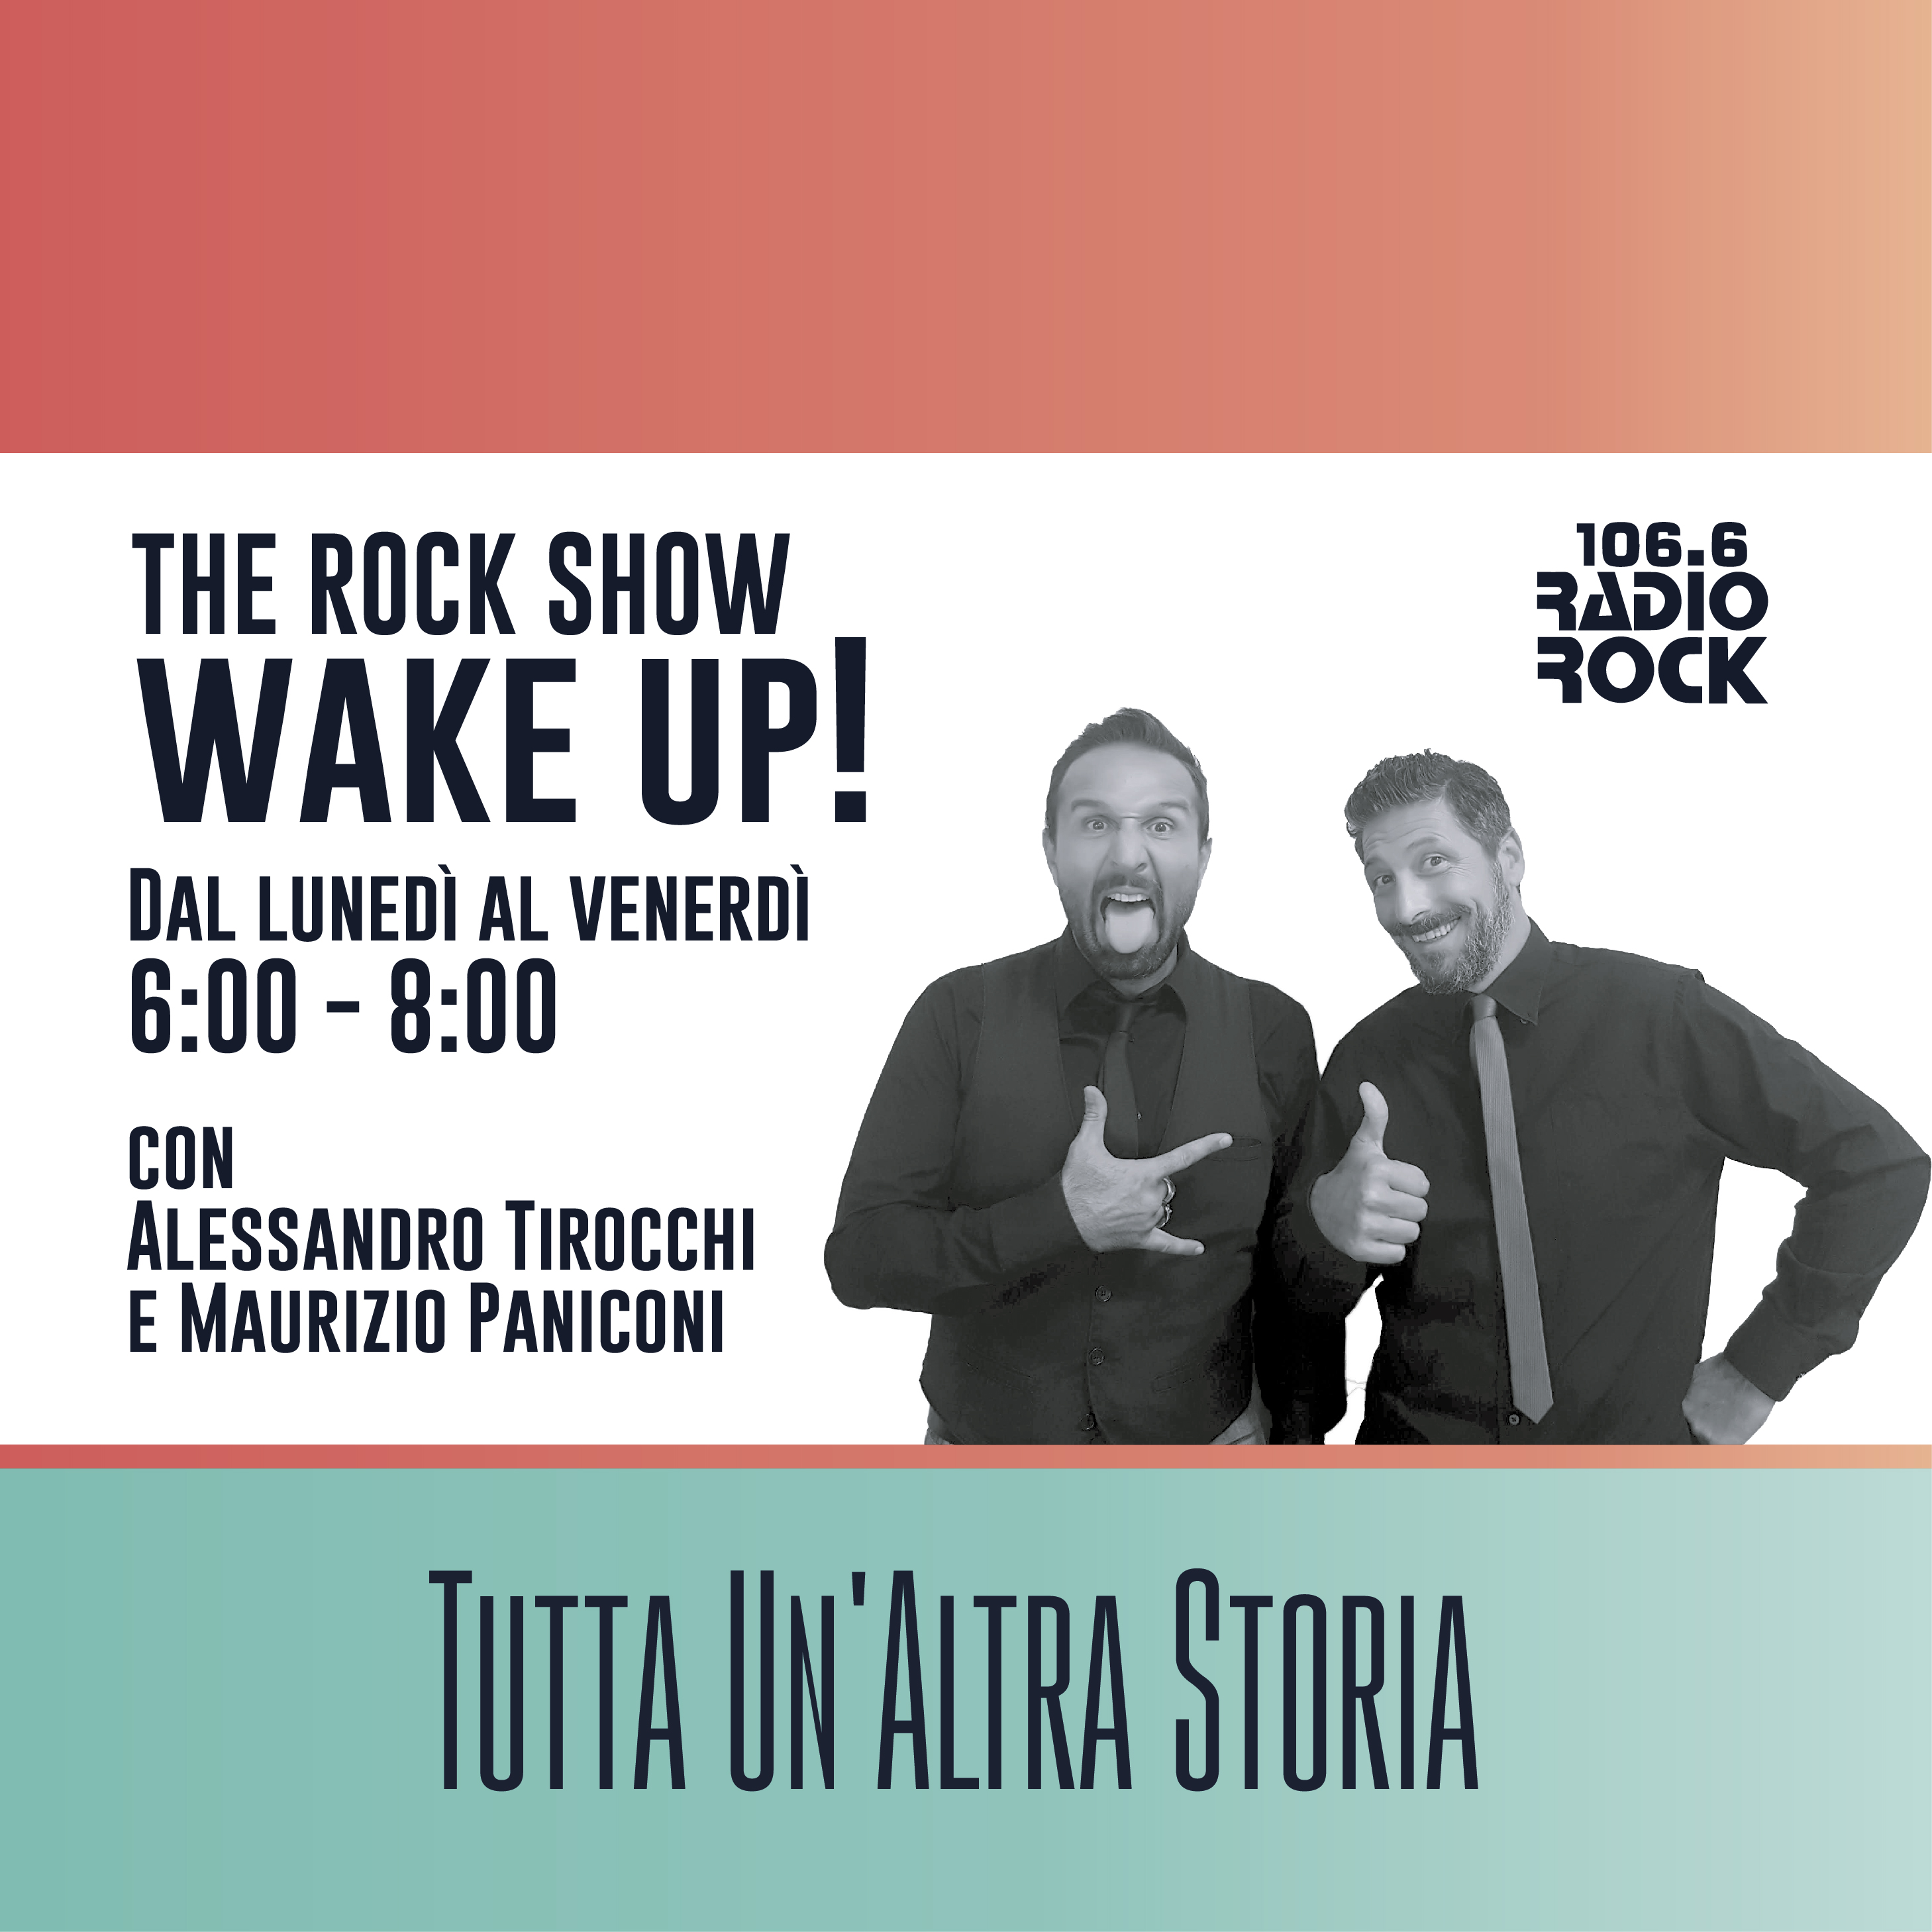 The Rock Show: Wake Up! – Parte 2 (31-05-21)